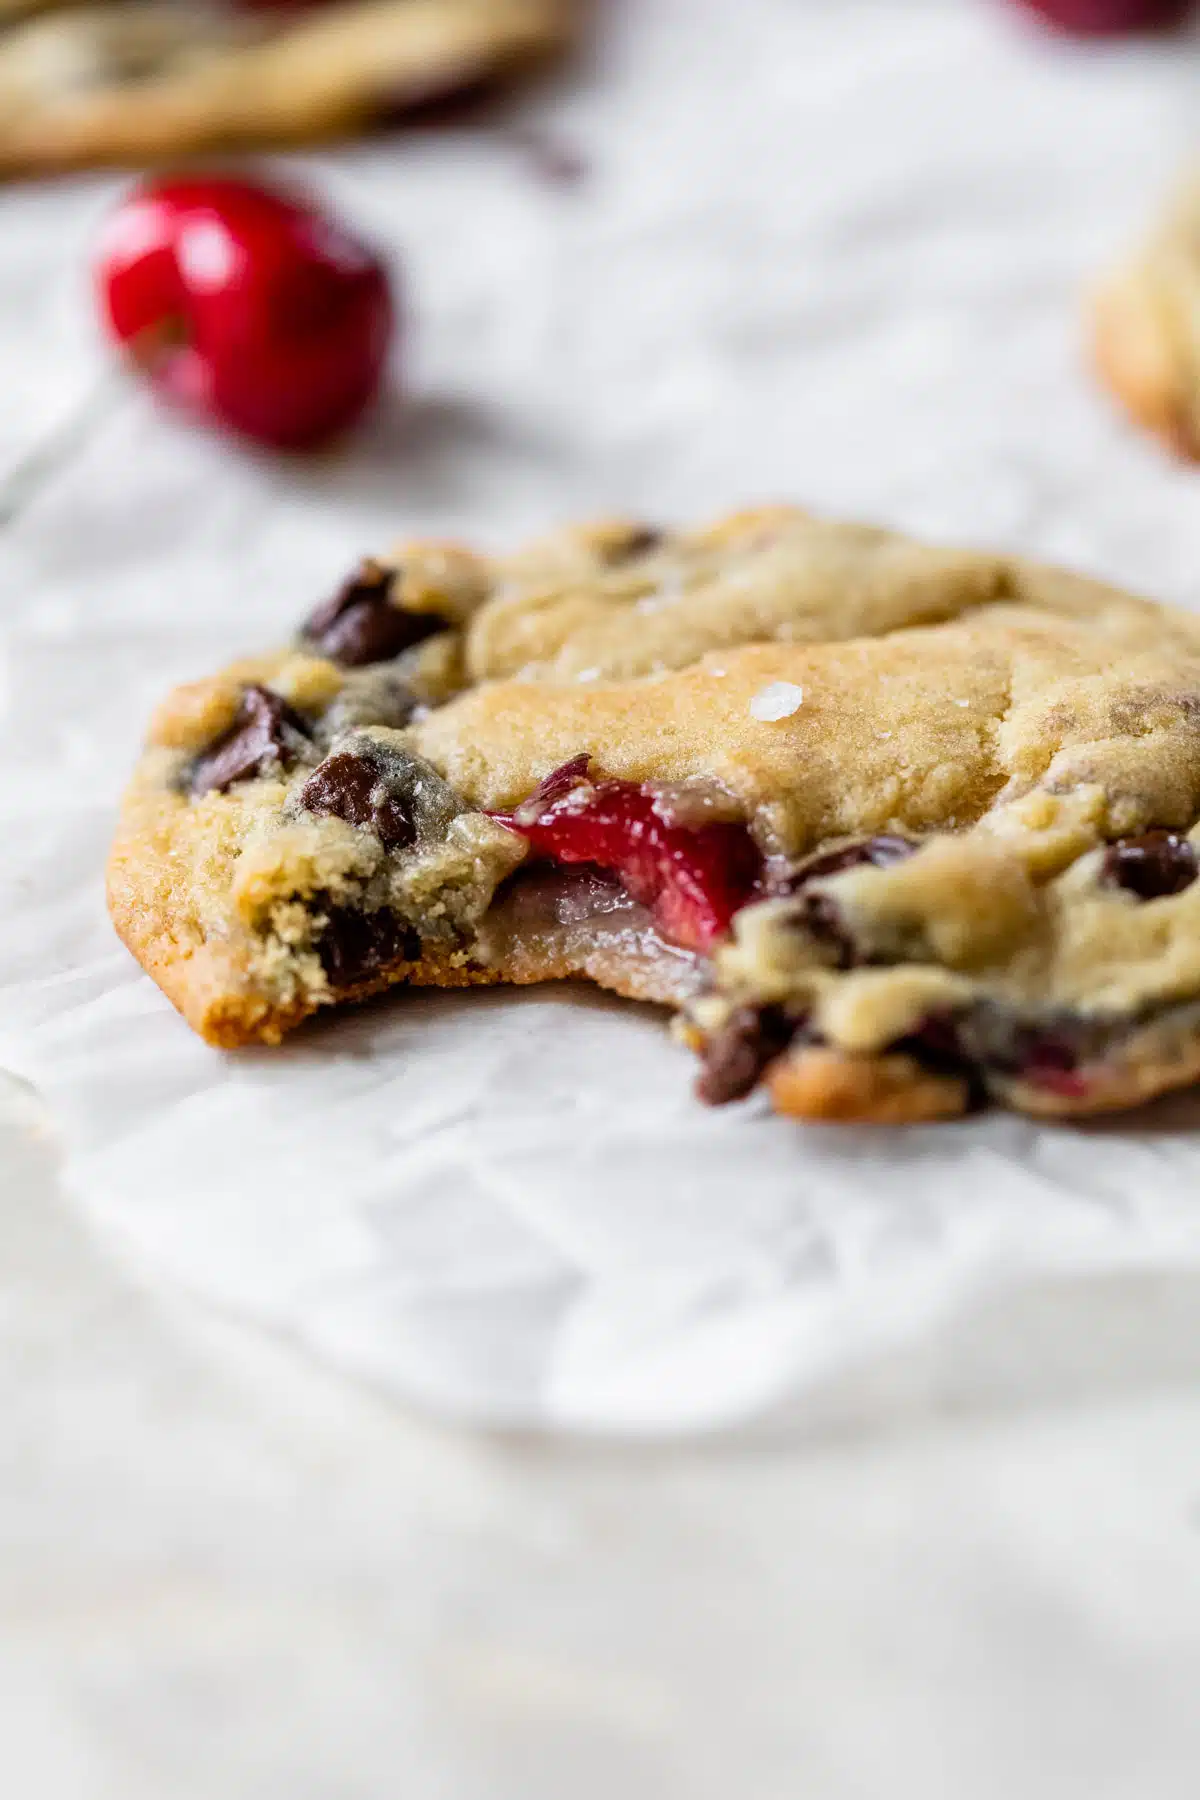 a chocolate chip cookie with cherries in it with a bite taken out of it